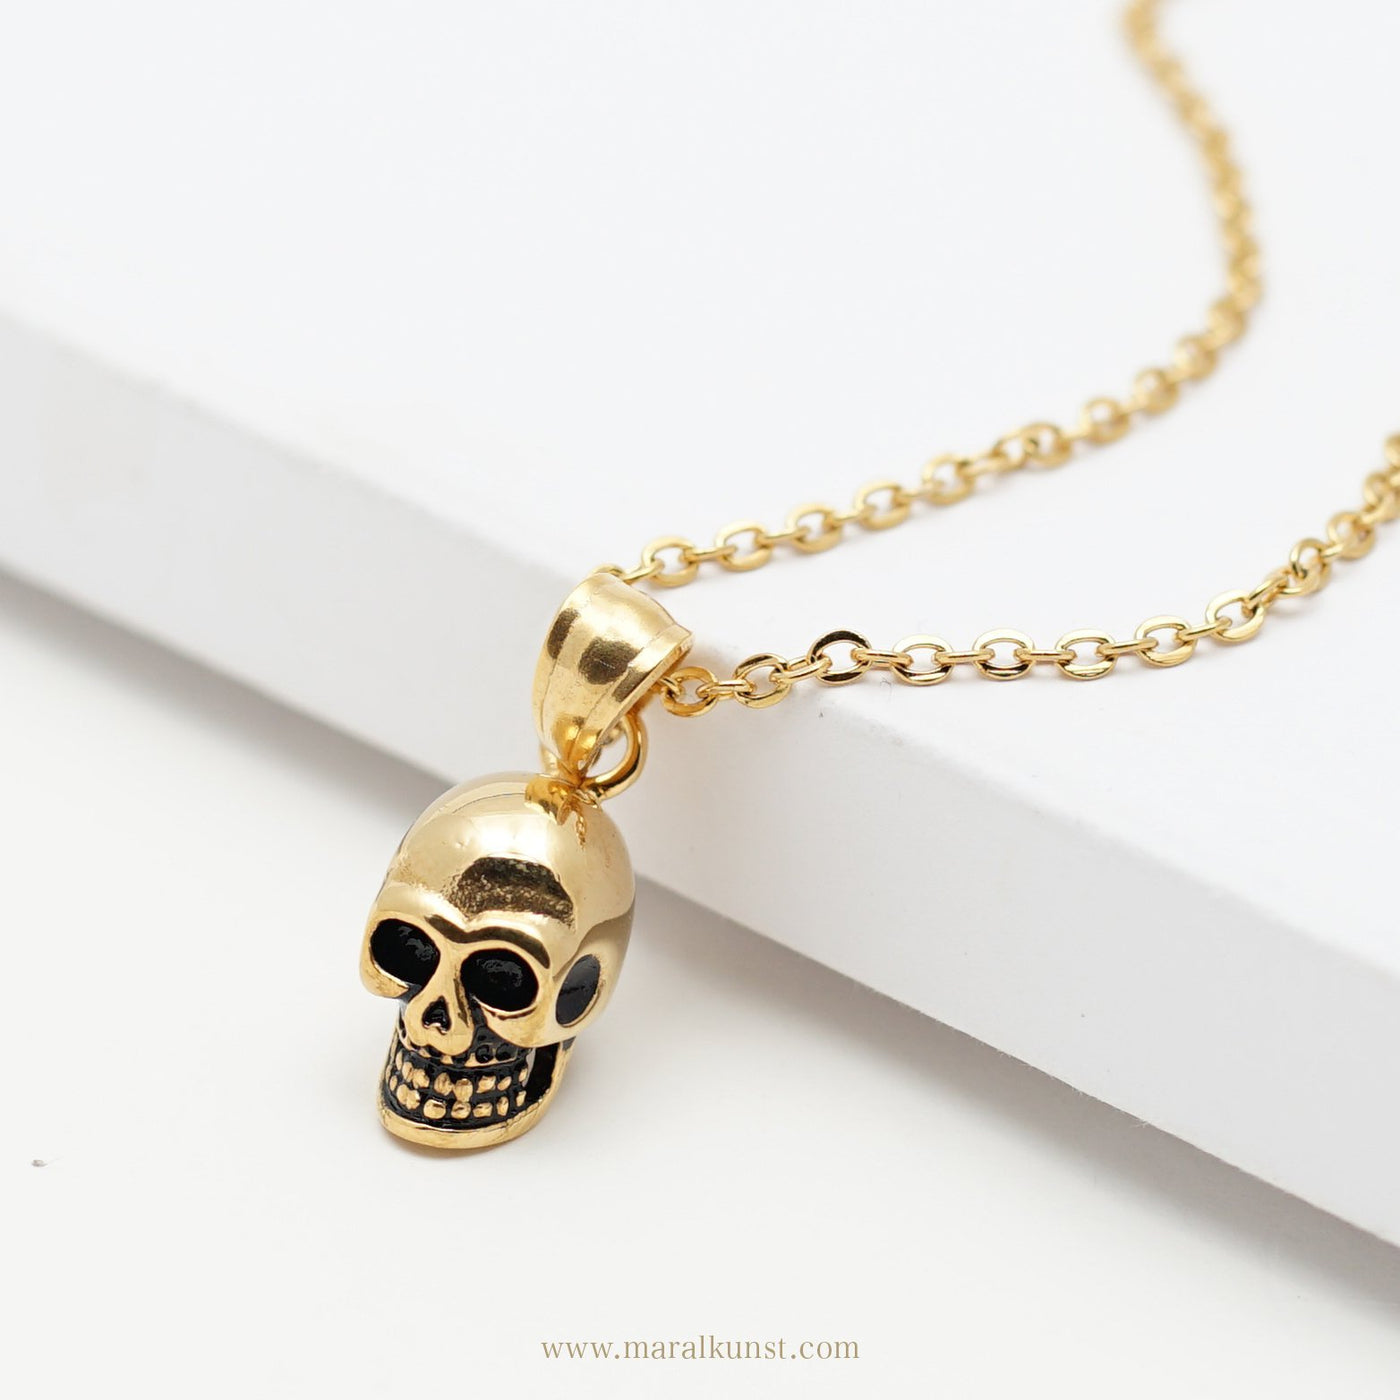 Human Skull Necklace - Maral Kunst Jewelry